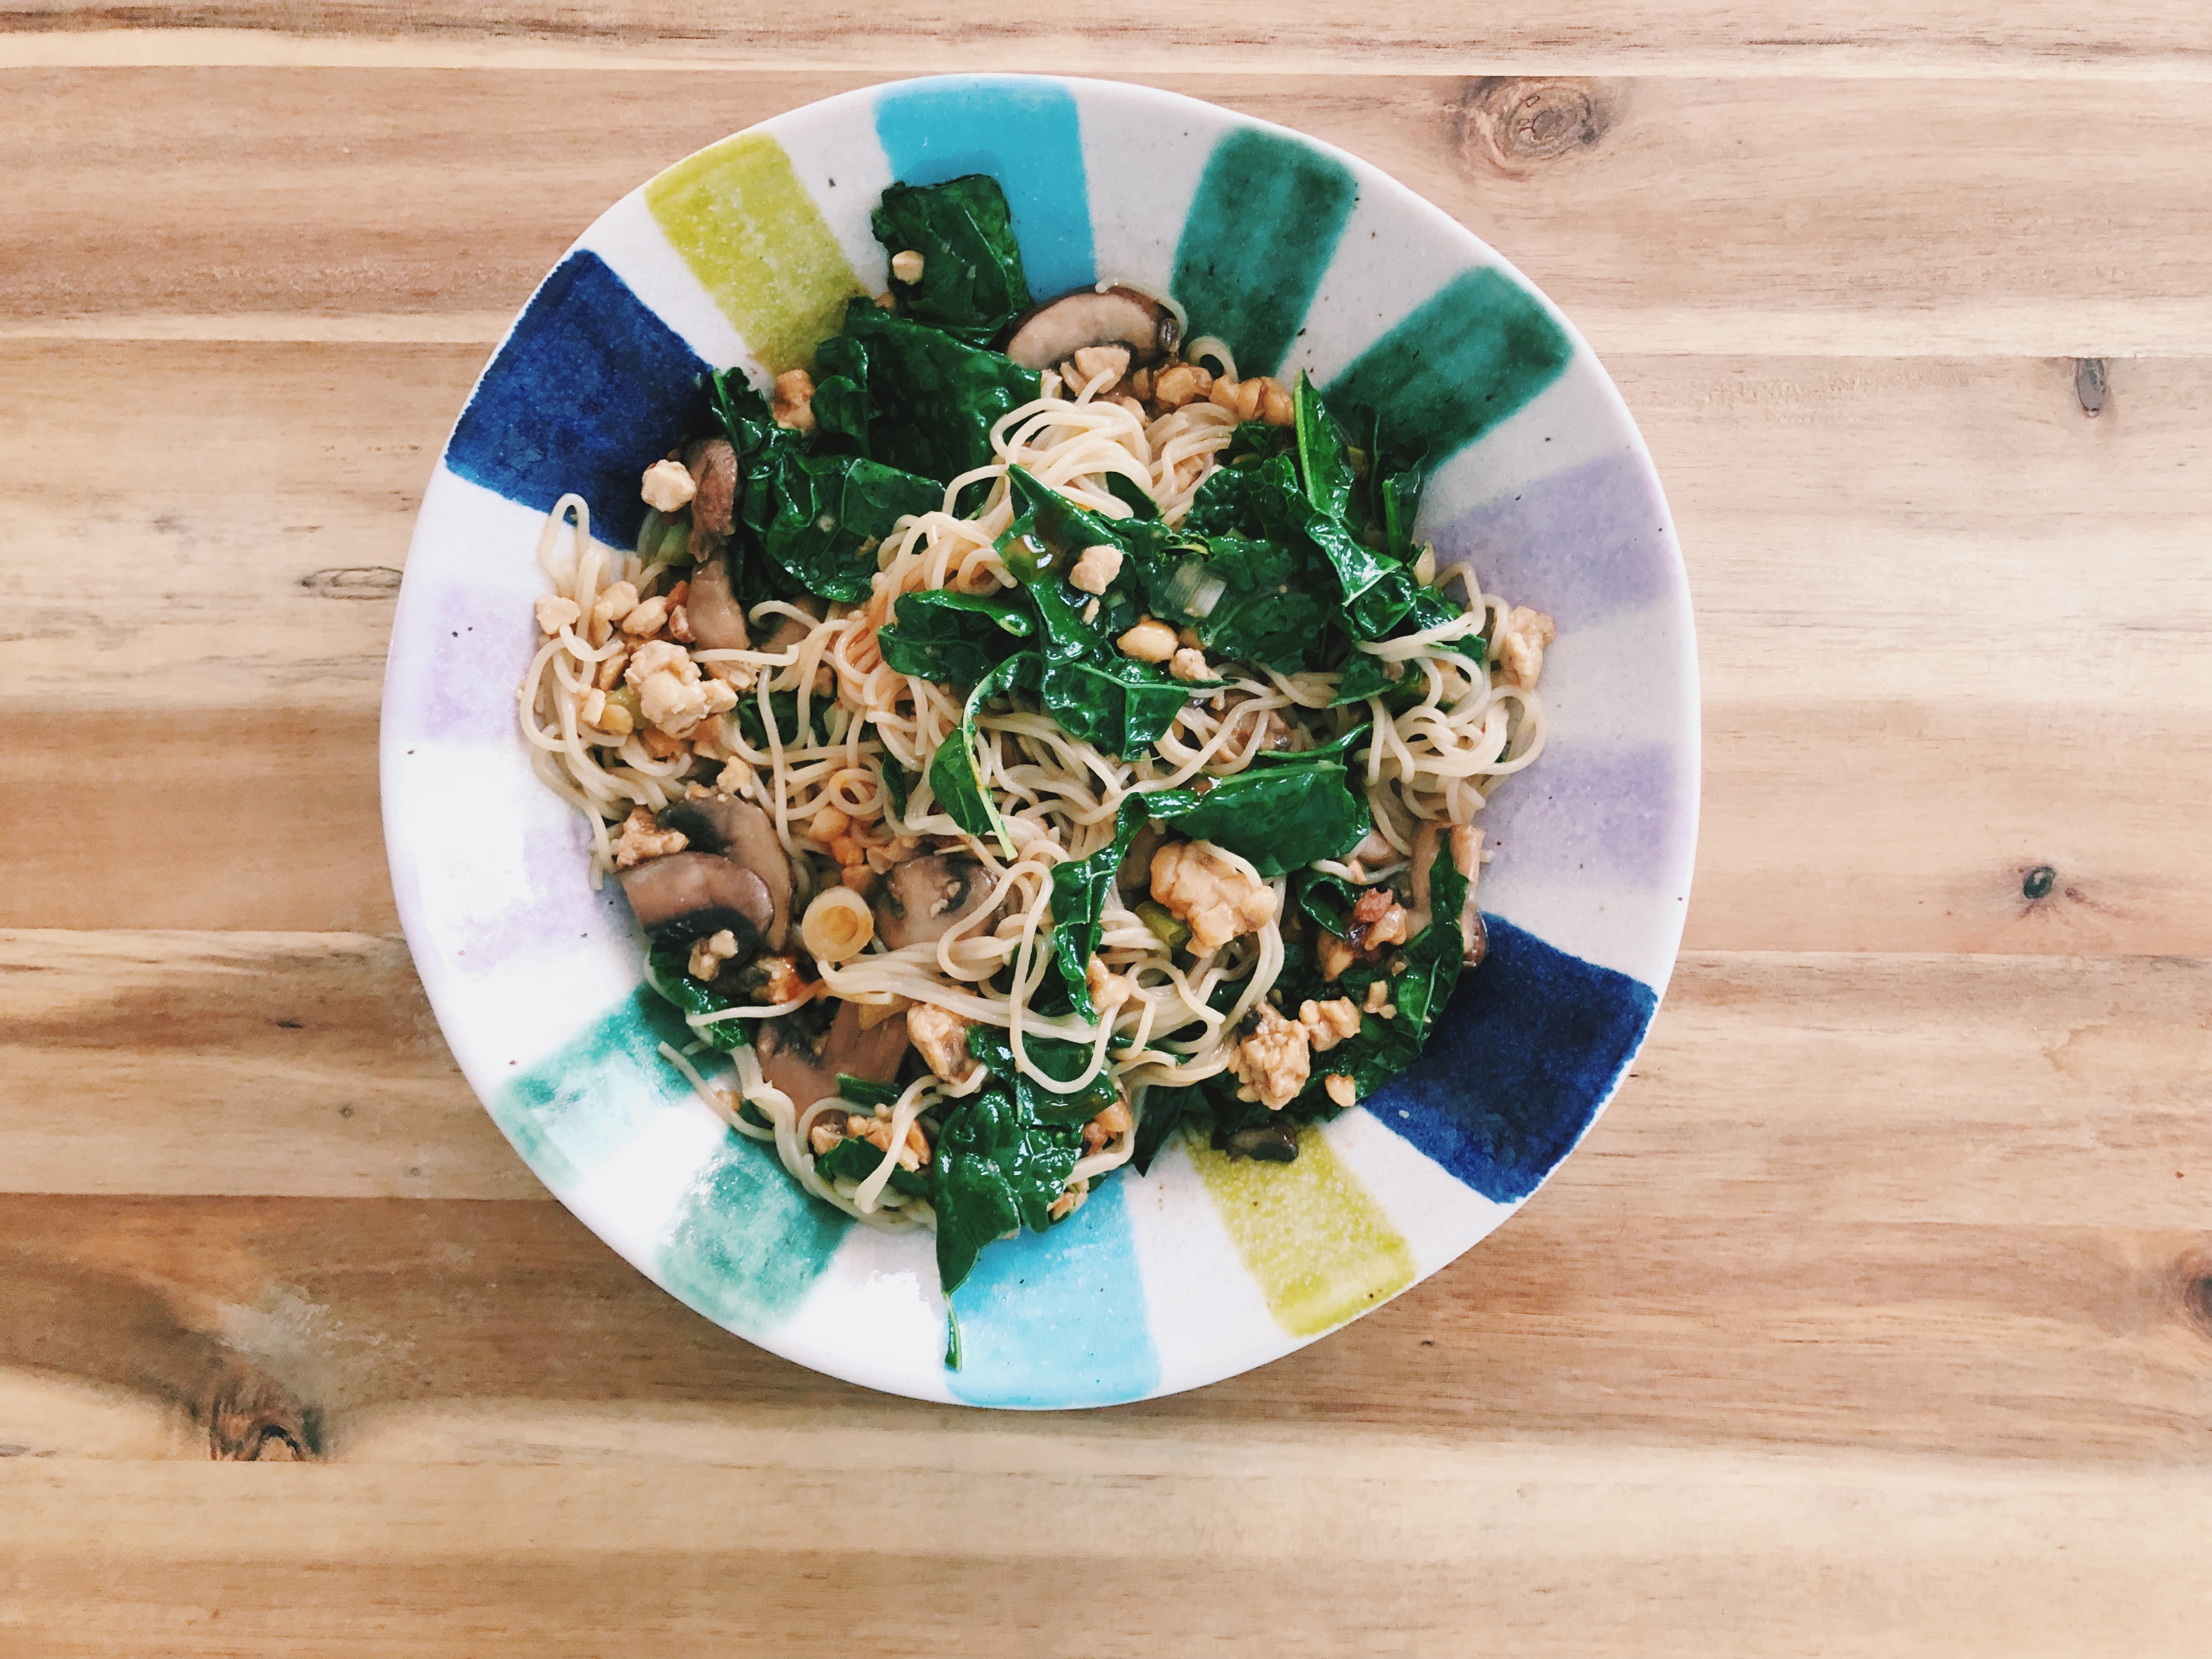 stir fried whole grain noodles with kale, mushrooms, and tempeh